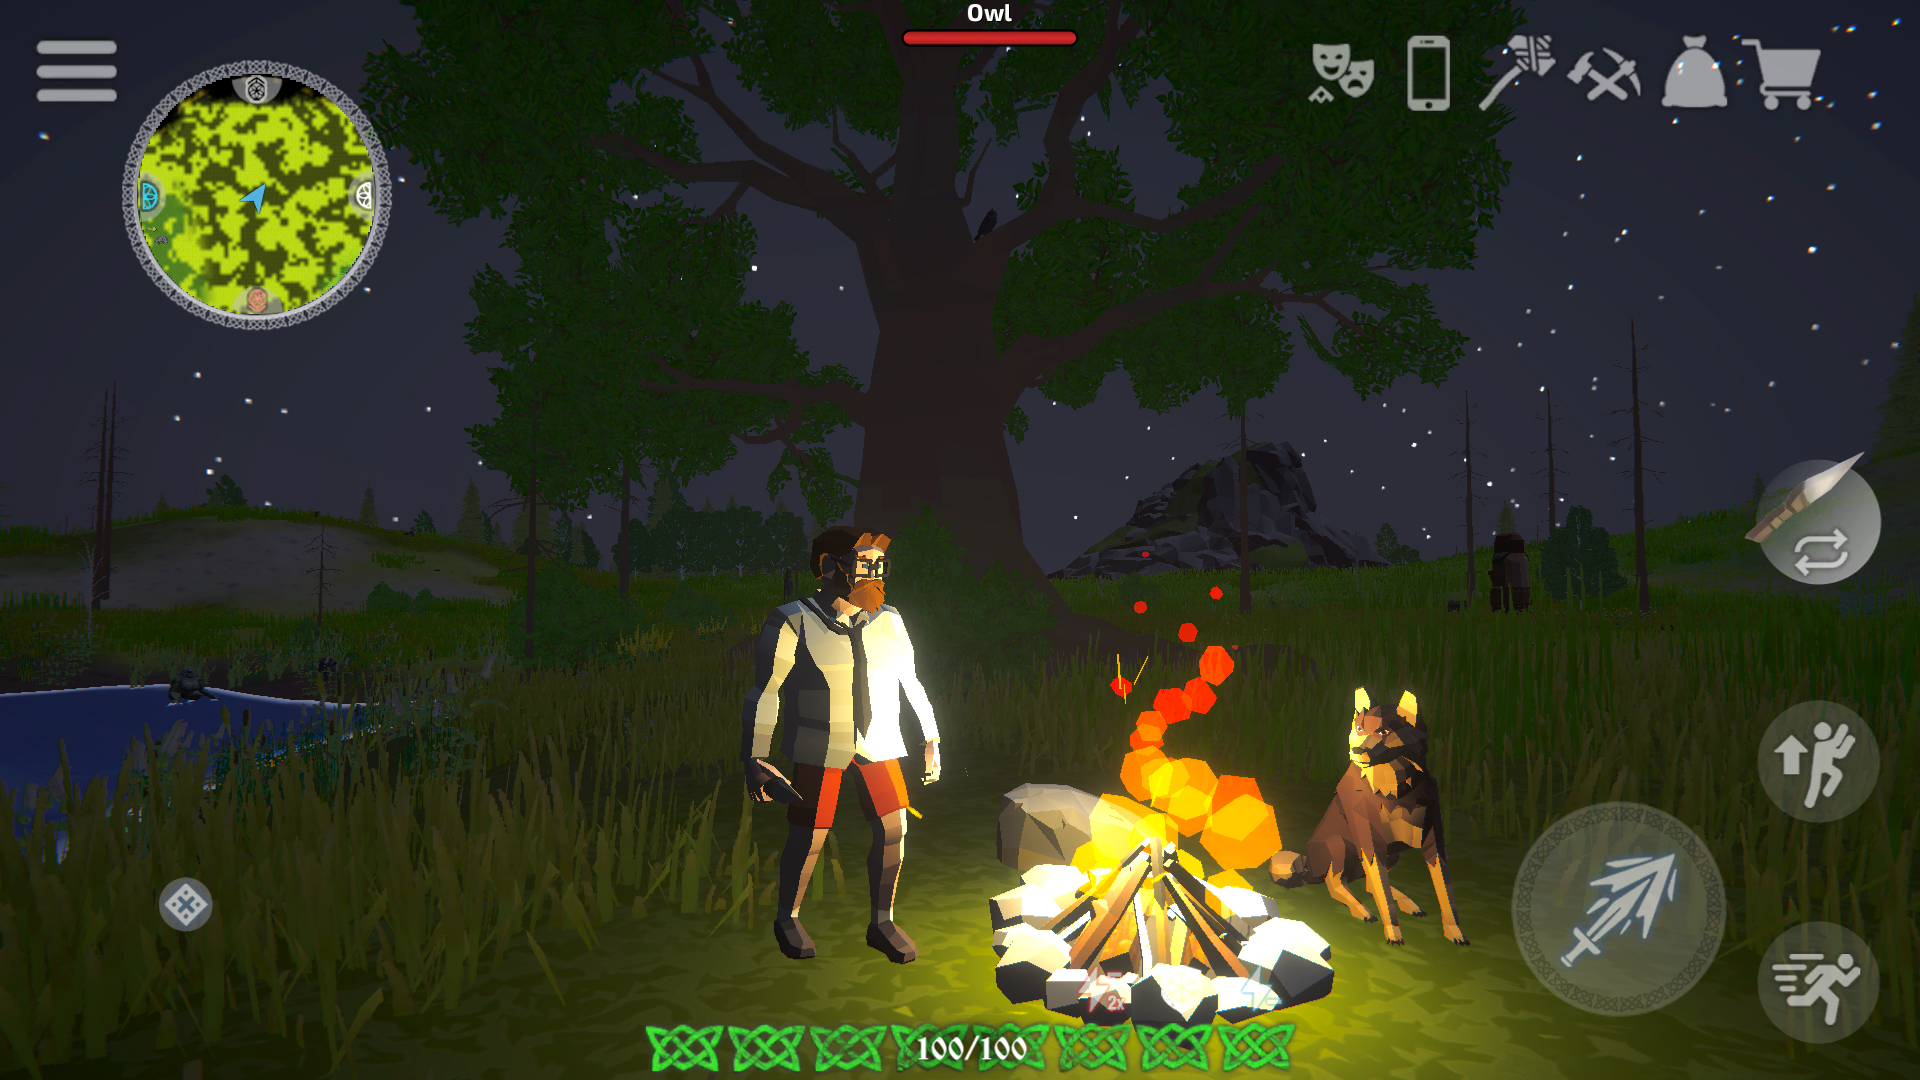 Scarica Unlucky Tale RPG Survival gratis per Android.